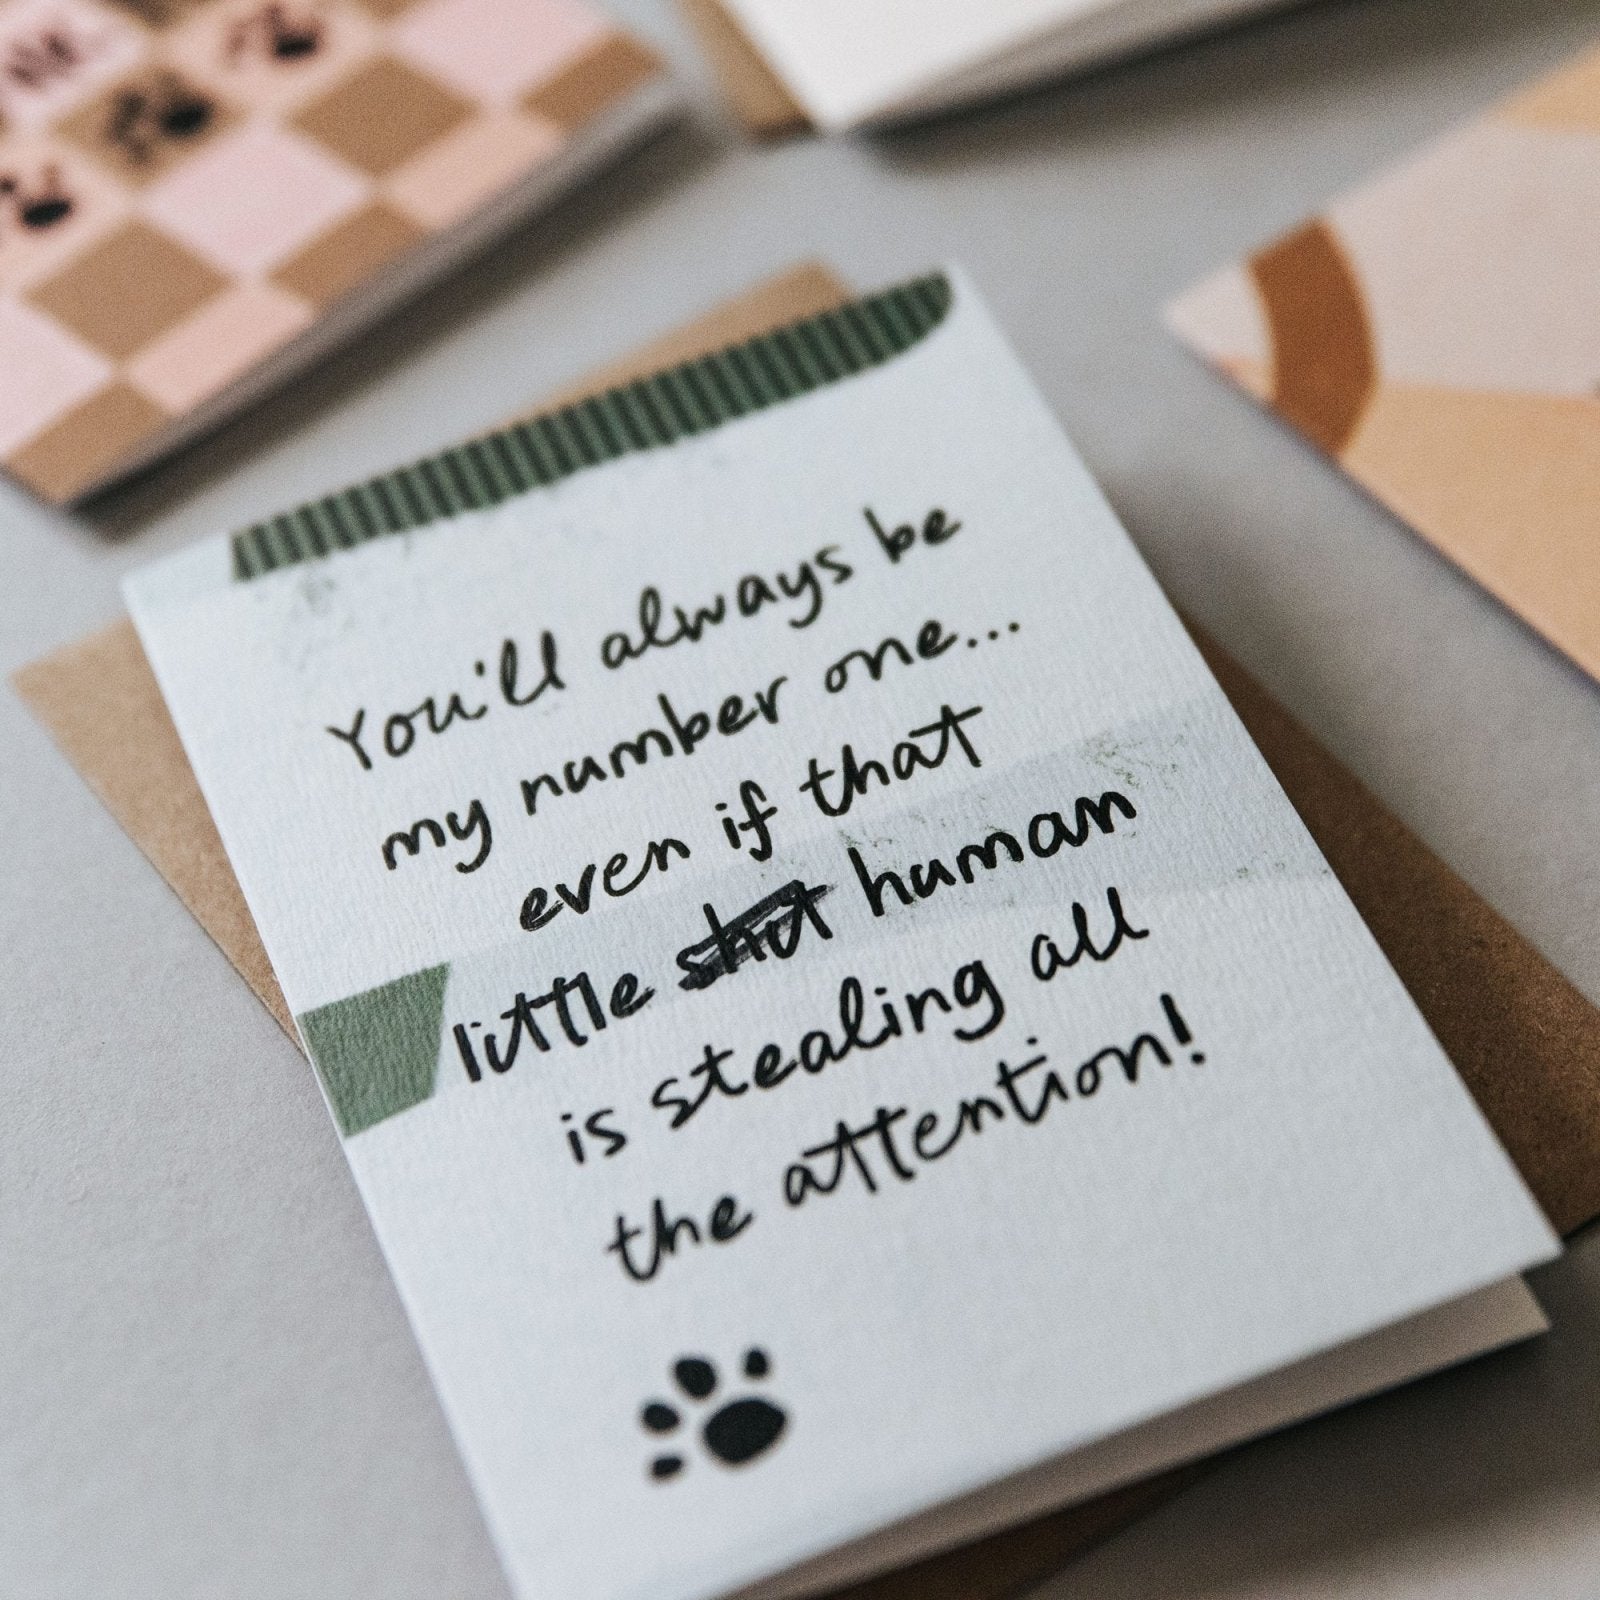 My Number One - Funny Card from Dog or Cat - I am Nat Ltd - Greeting Card